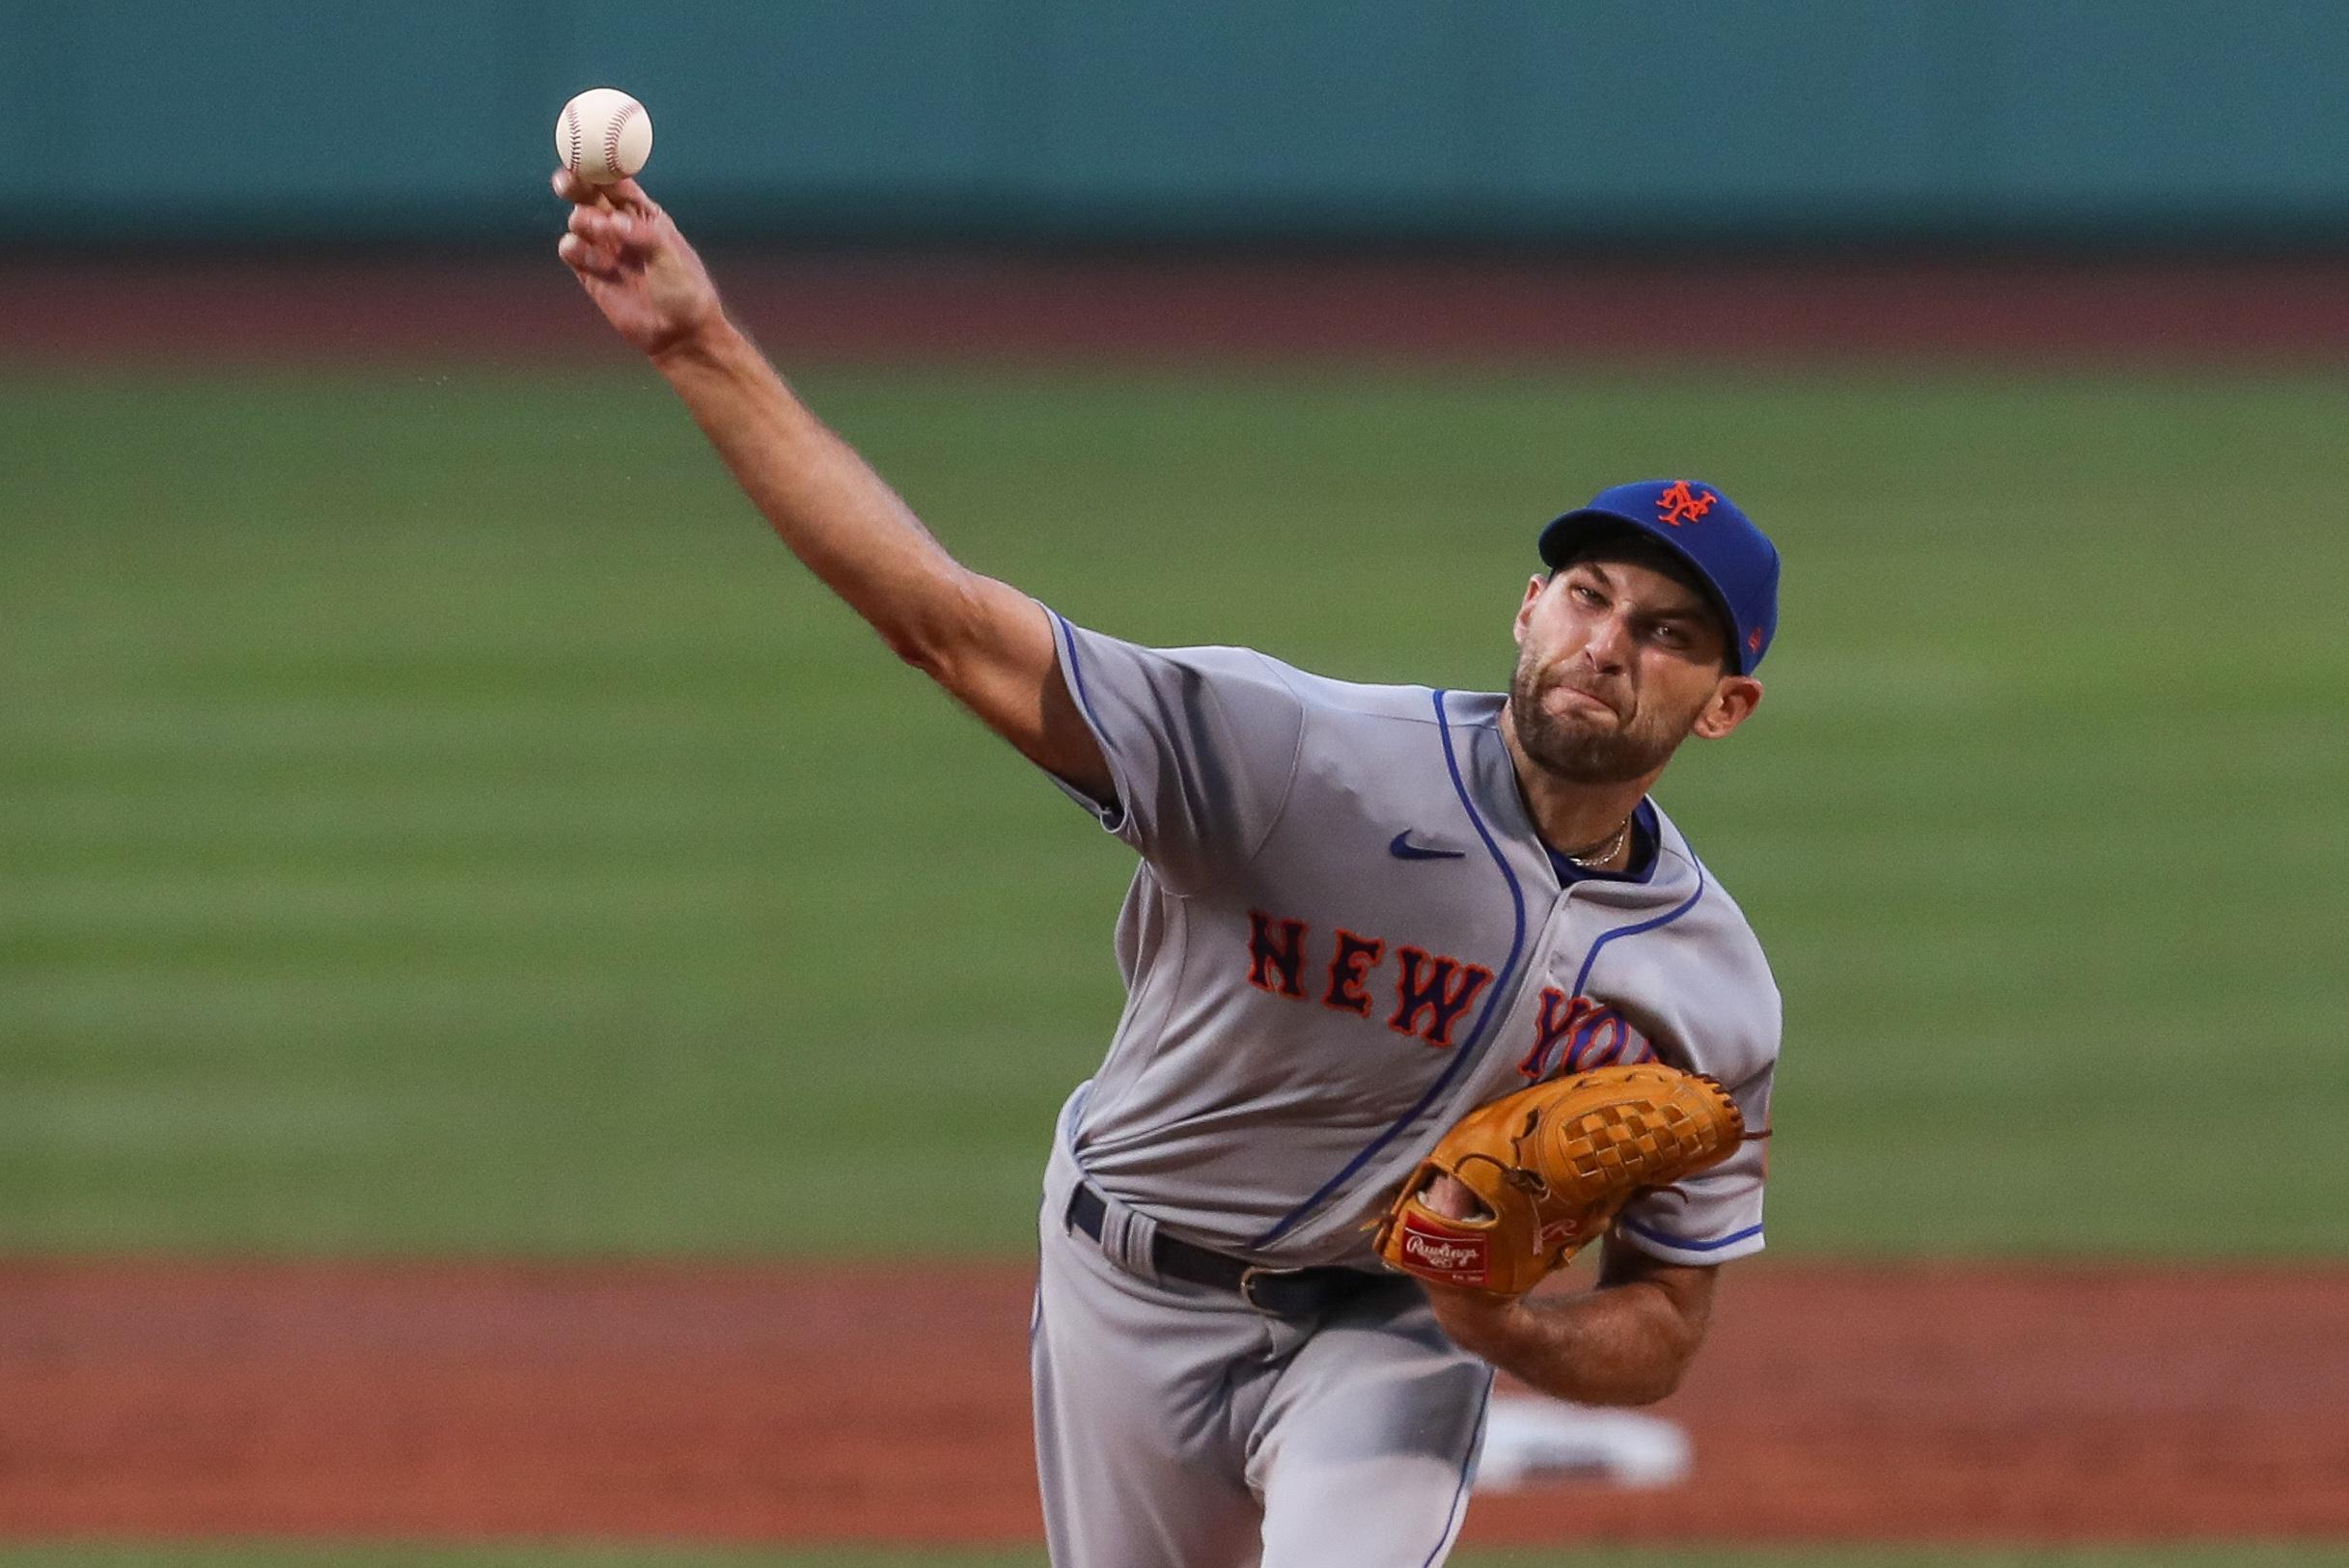 Michael Wacha delivers pitch in Mets debut / USA TODAY